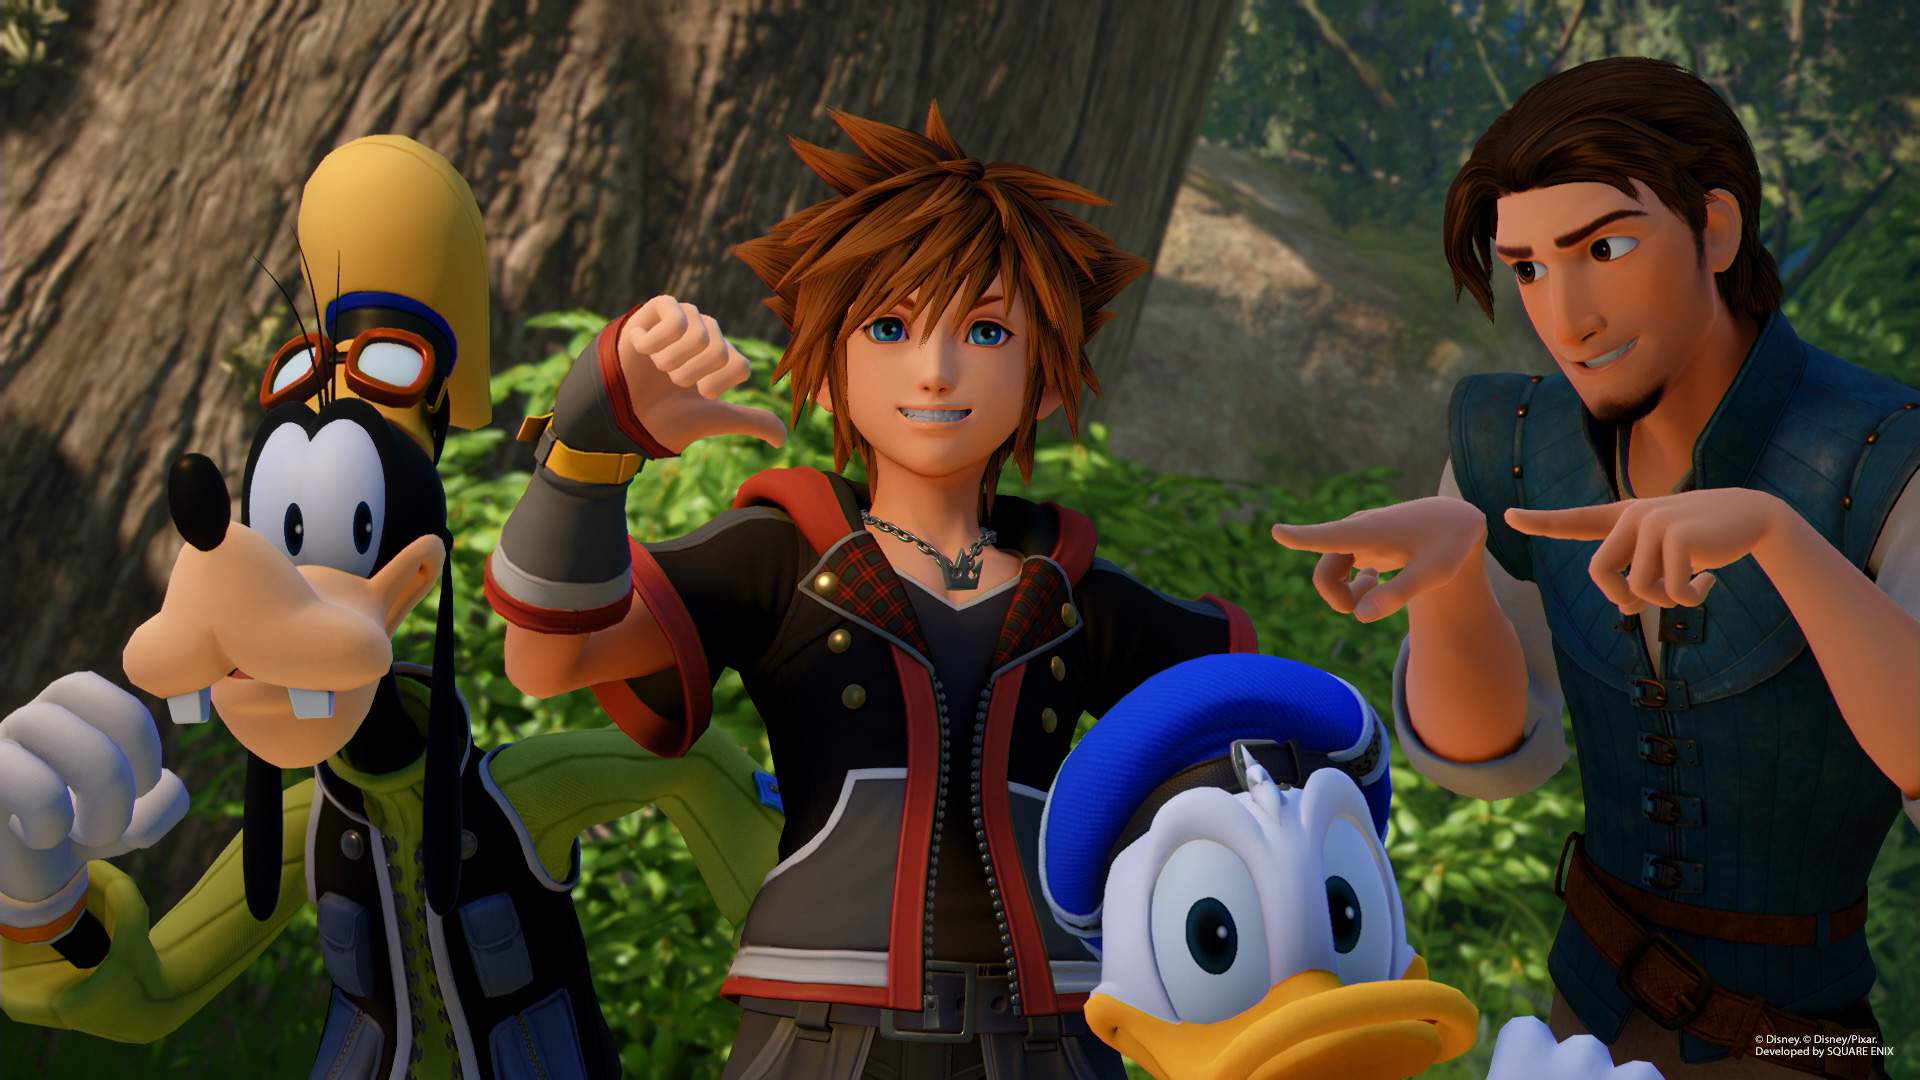 Kingdom Hearts: How and Where to Play